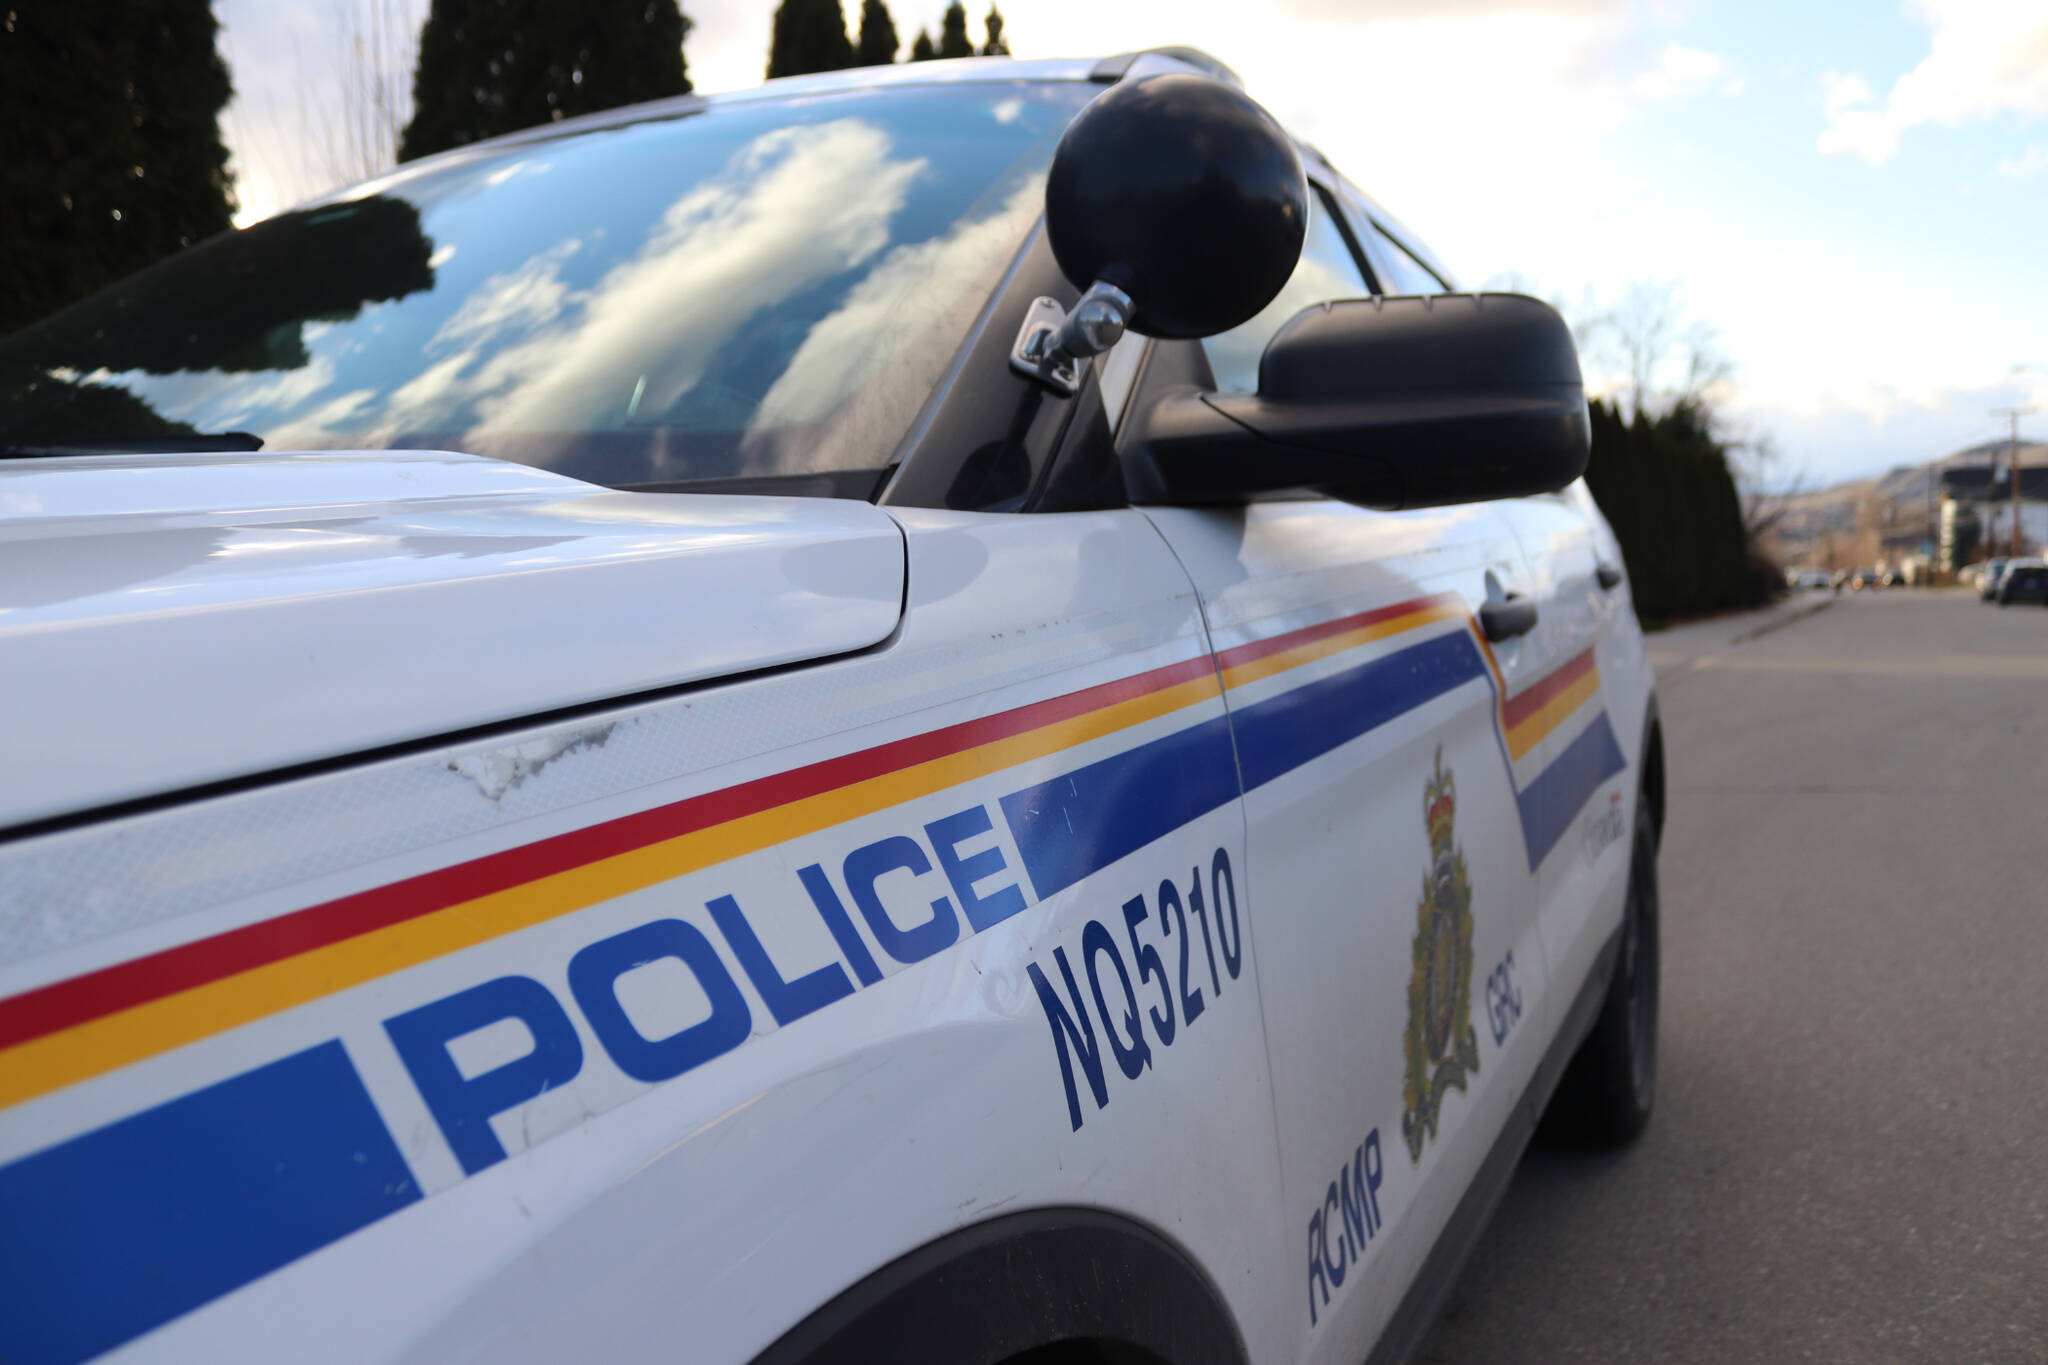 A woman in a vehicle suffering a mental health crisis was apprehended after ramming into police vehicles Wednesday, Feb. 8, 2023. Police say she was transported to hospital before injuring herself or anyone else. (Brendan Shykora - Morning Star)